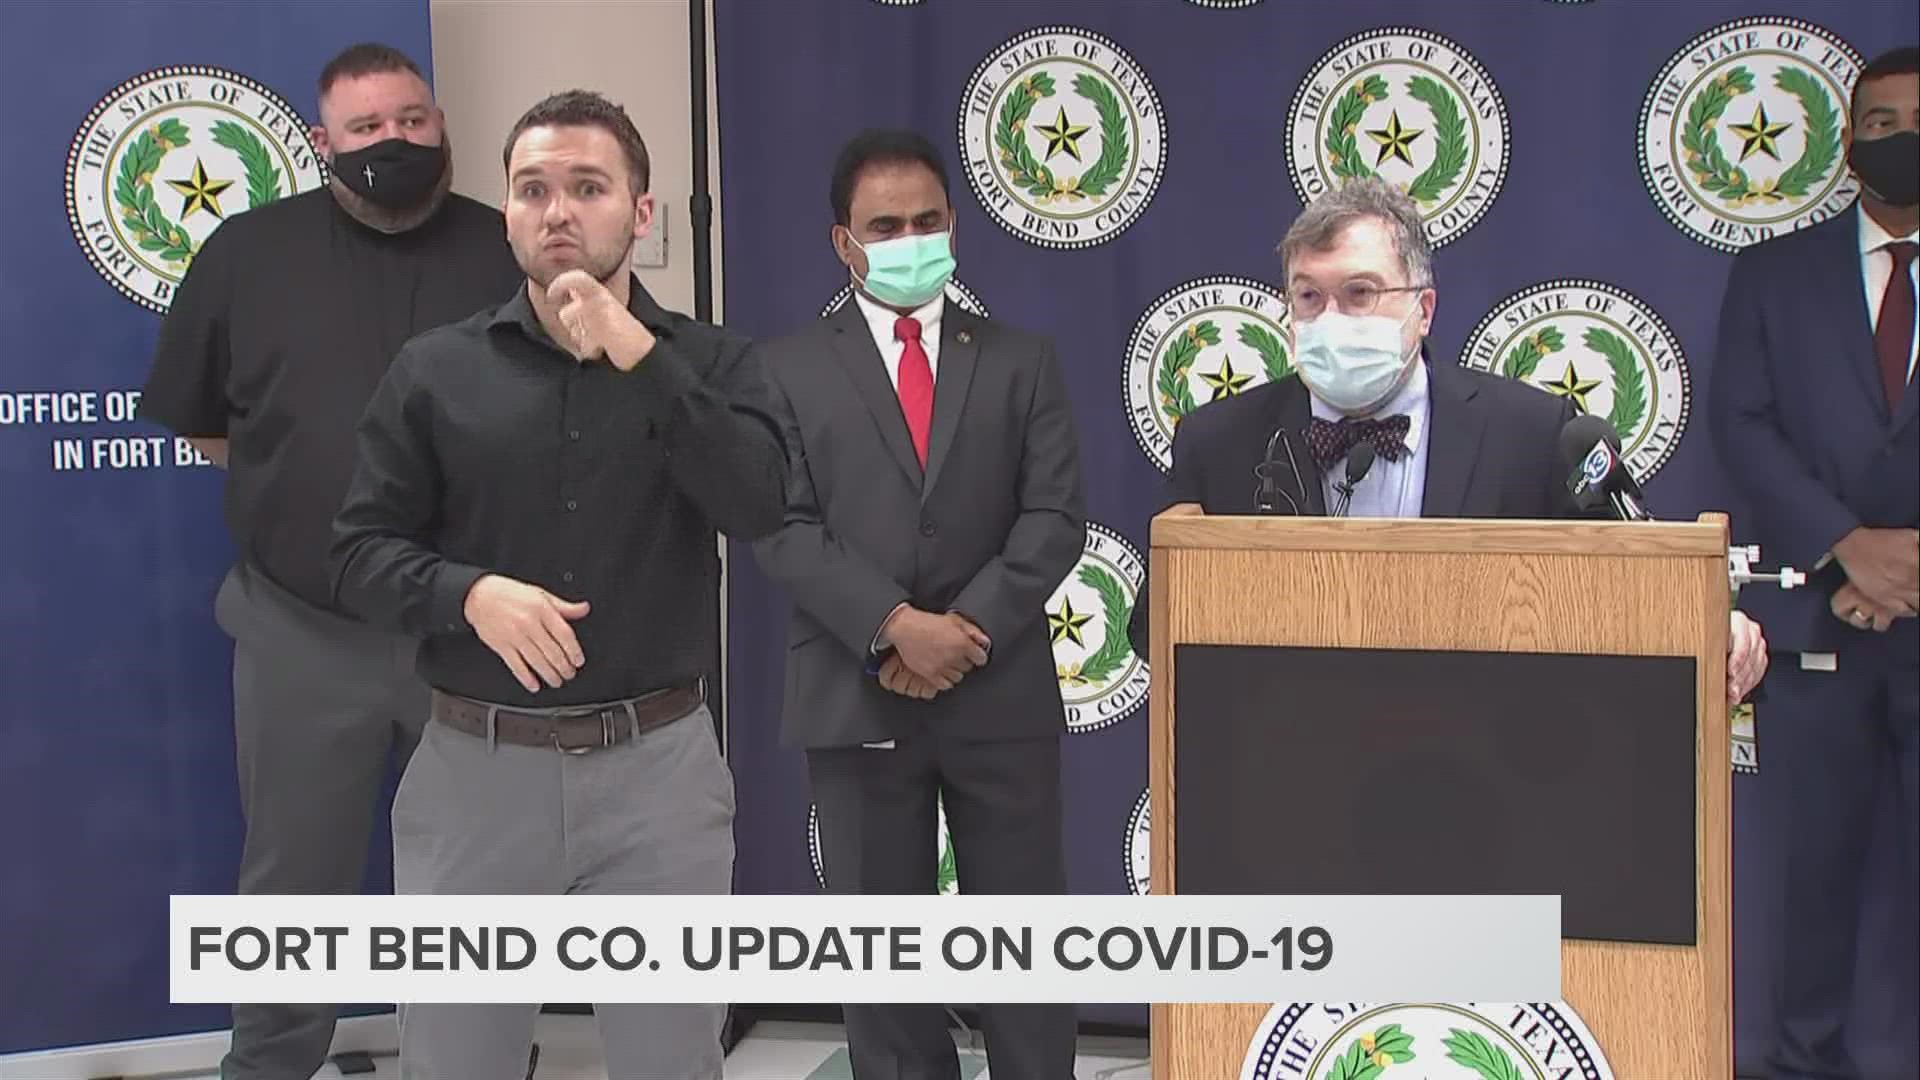 A portion of Tuesday's press conference with local leaders in Fort Bend County